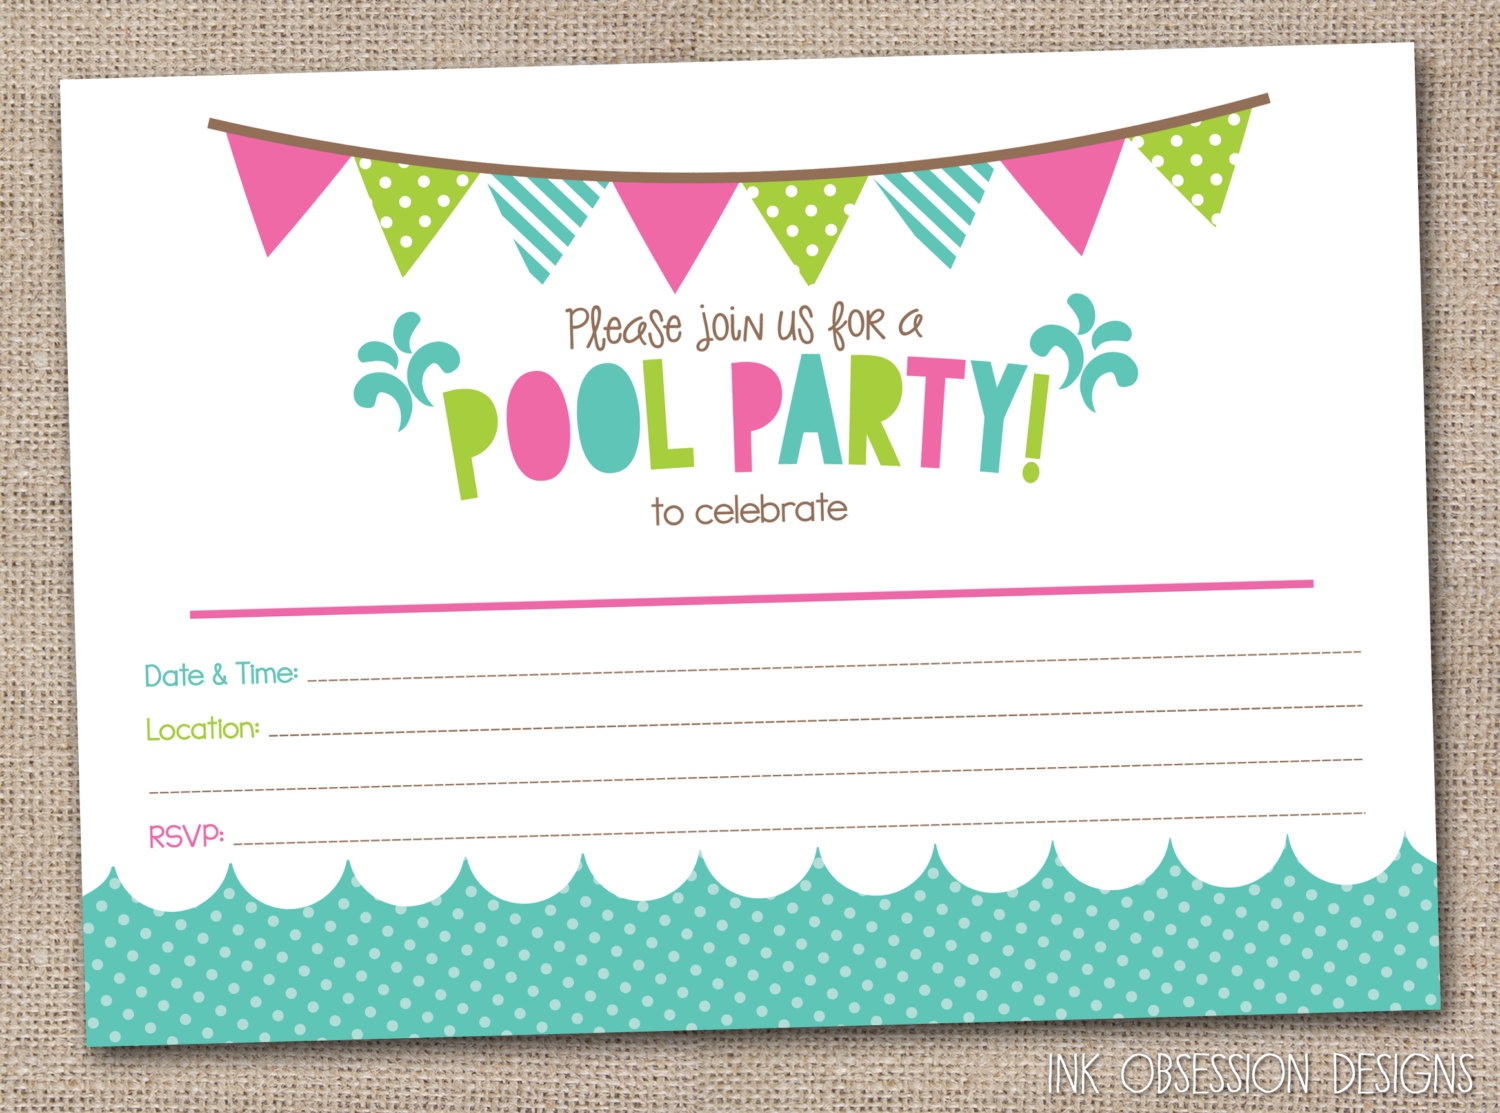 45 Pool Party Invitations | Kittybabylove - Free Printable Pool Party Invitation Cards